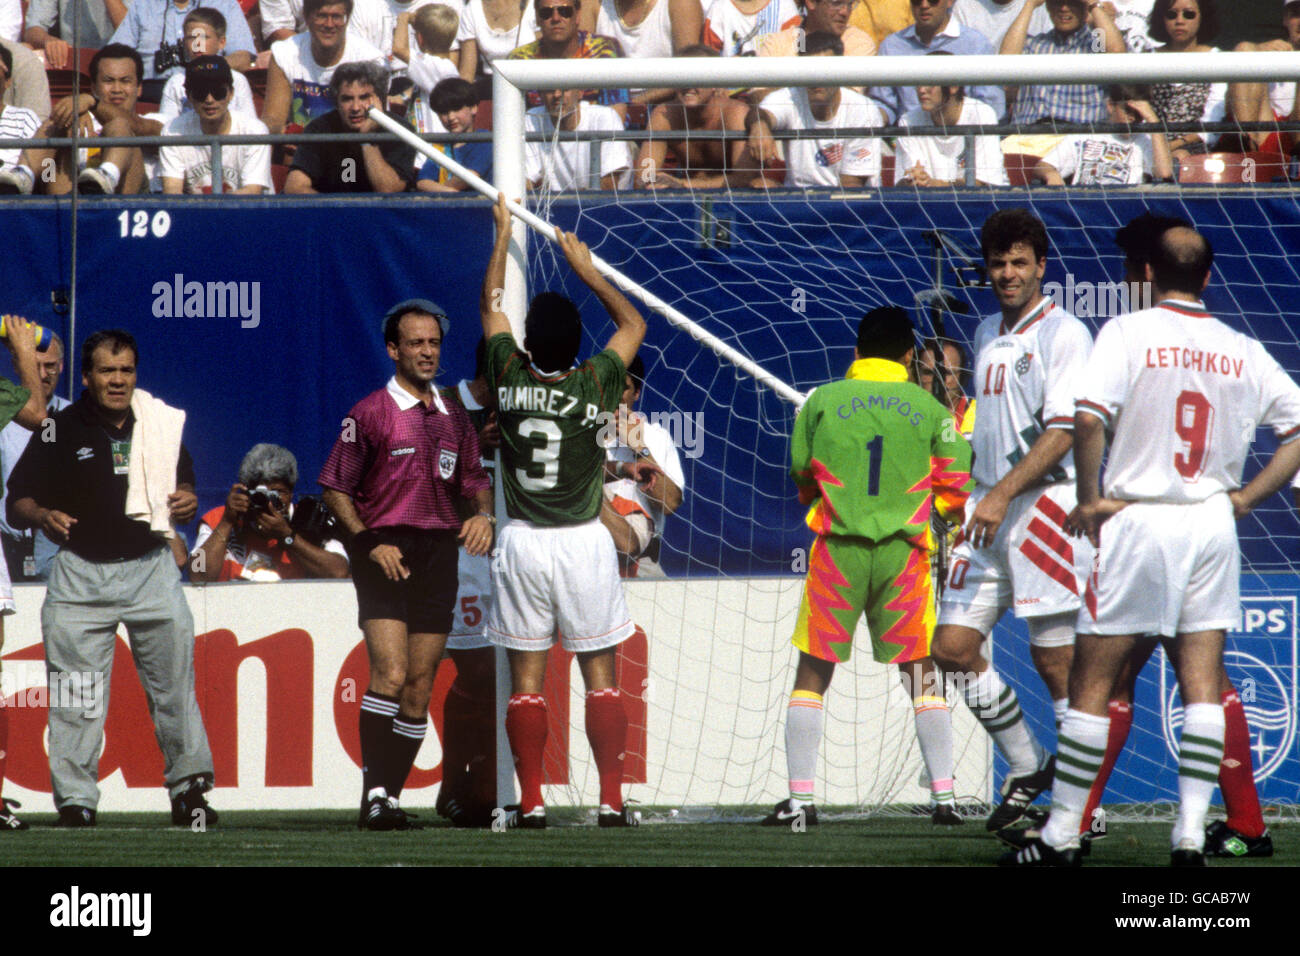 Mexico's Juan Ramirez (3) and goalkeeper Mexico Goalkeeper Jorge Campos pull on the broken stanchion after team mate Marcelino Bernal (not pictured) had fell into the net, thus breaking the goal. Stock Photo